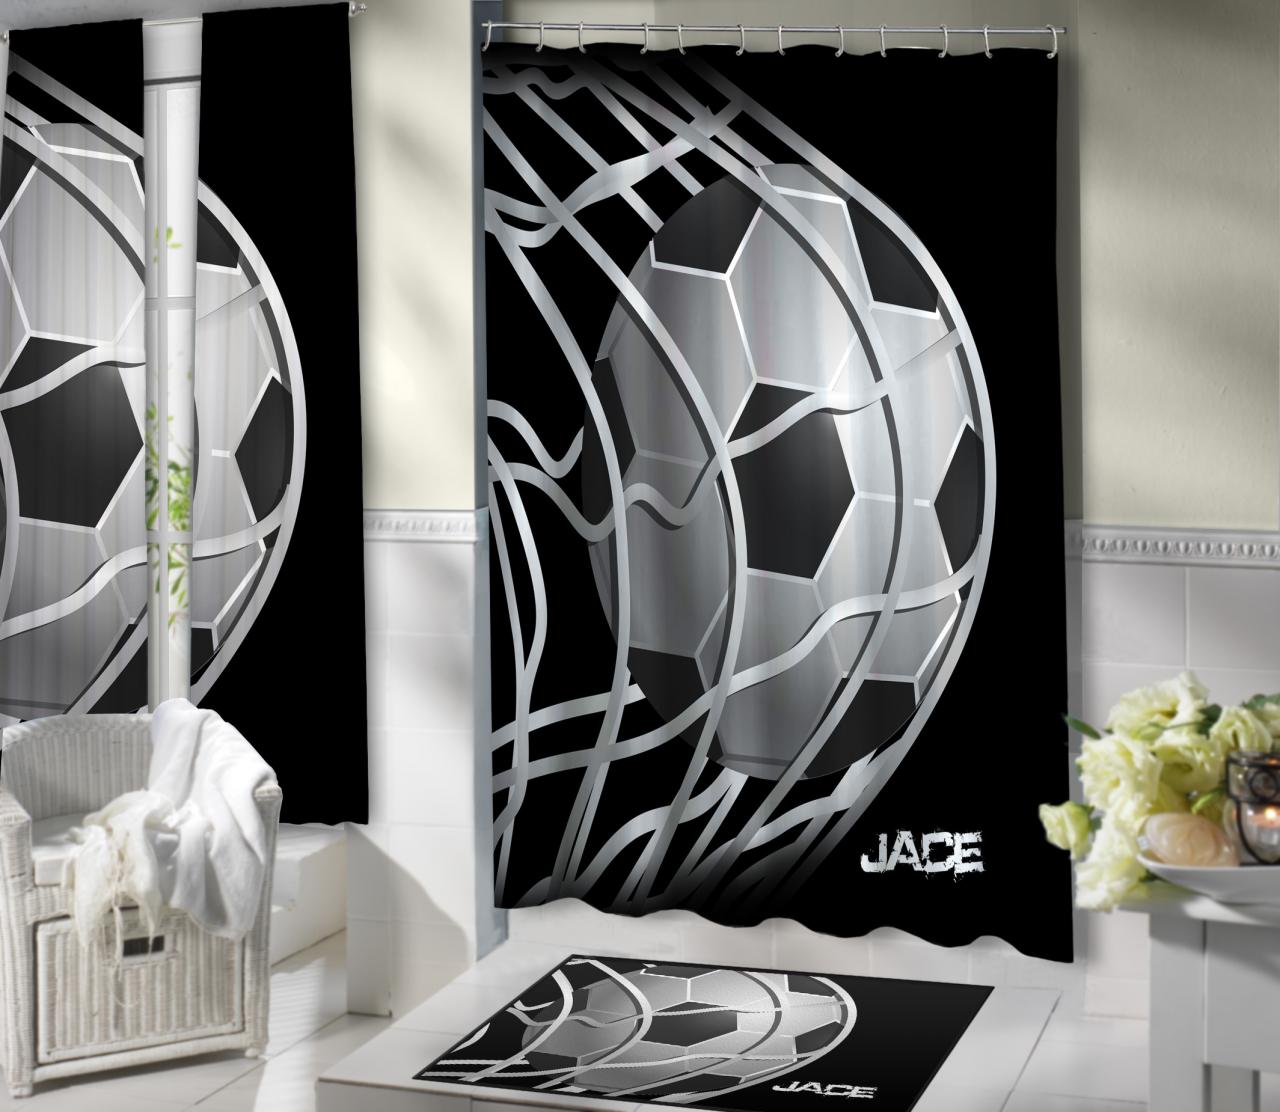 Black and White Soccer Themed Shower Curtain, great Sports Shower